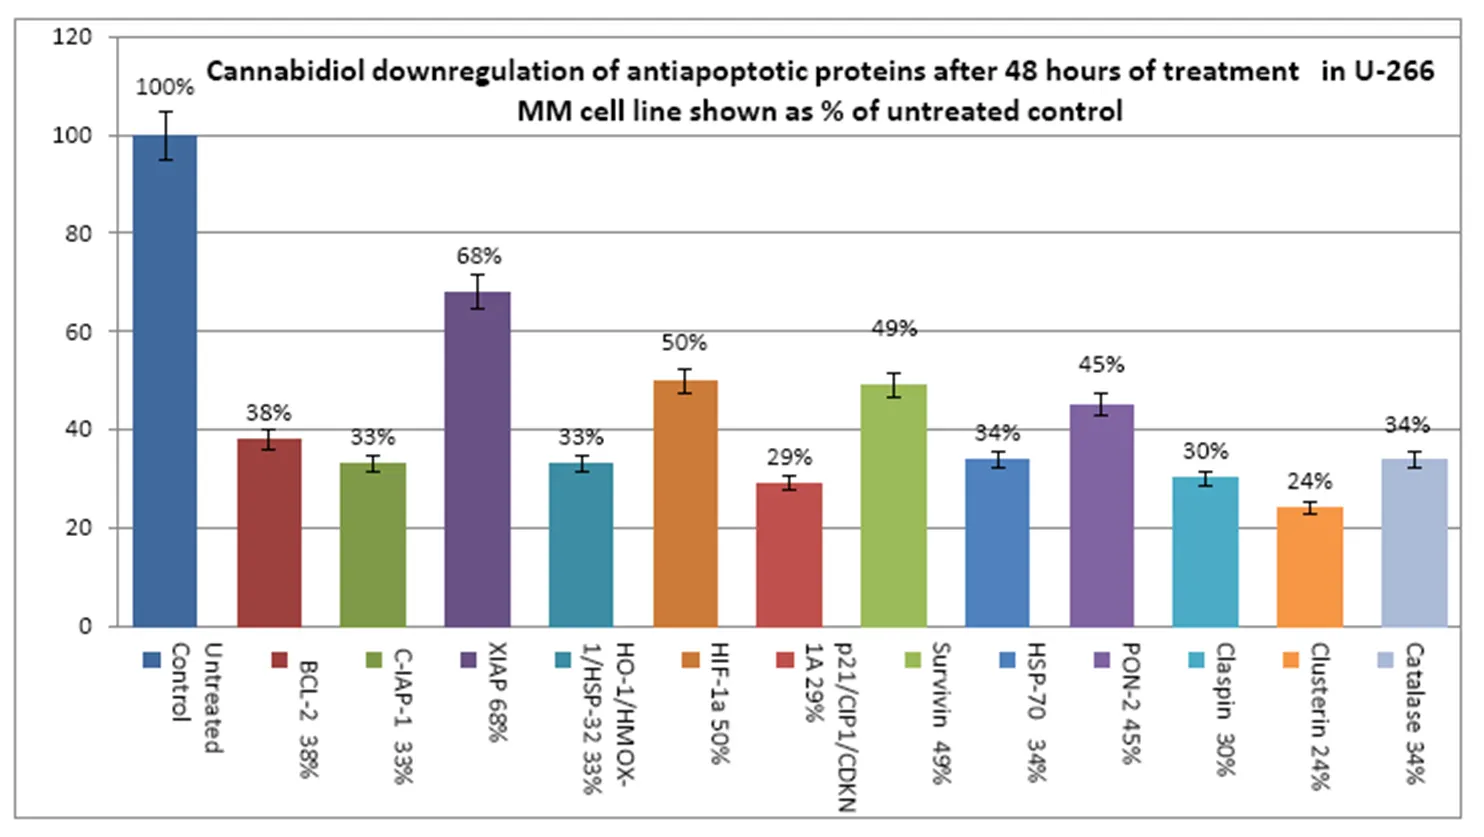 Cannabidiol downregulation of antiapoptotic proteins after 48 hours of treatment in U-266
MM cell line shown as % of untreated control